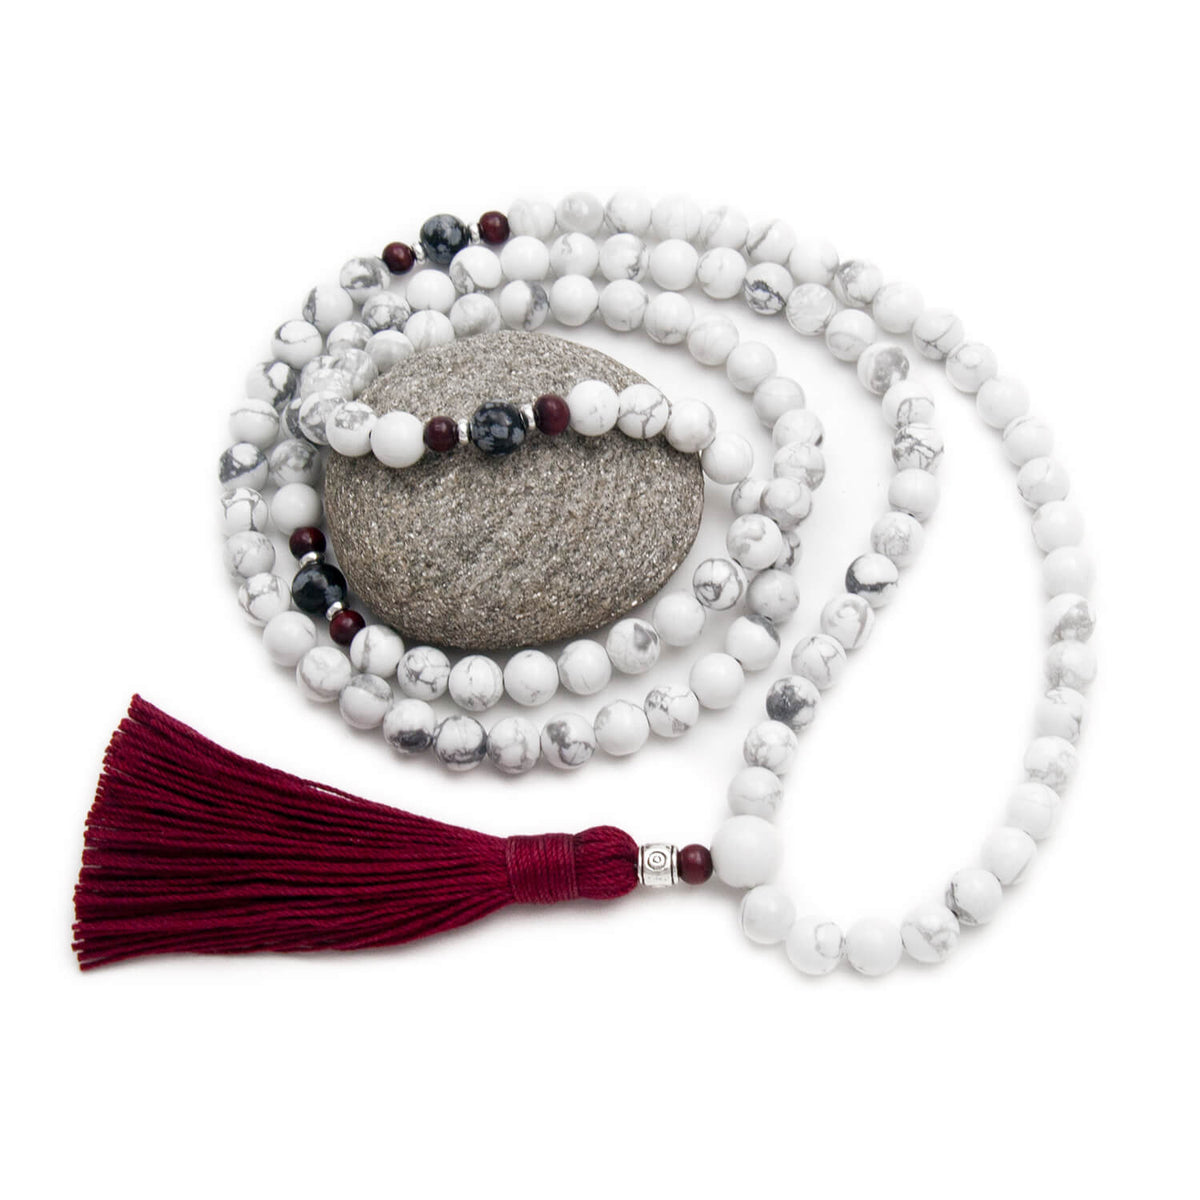 Calm Thoughts Mala Necklace 108 Howlite | Golden Lotus Mala